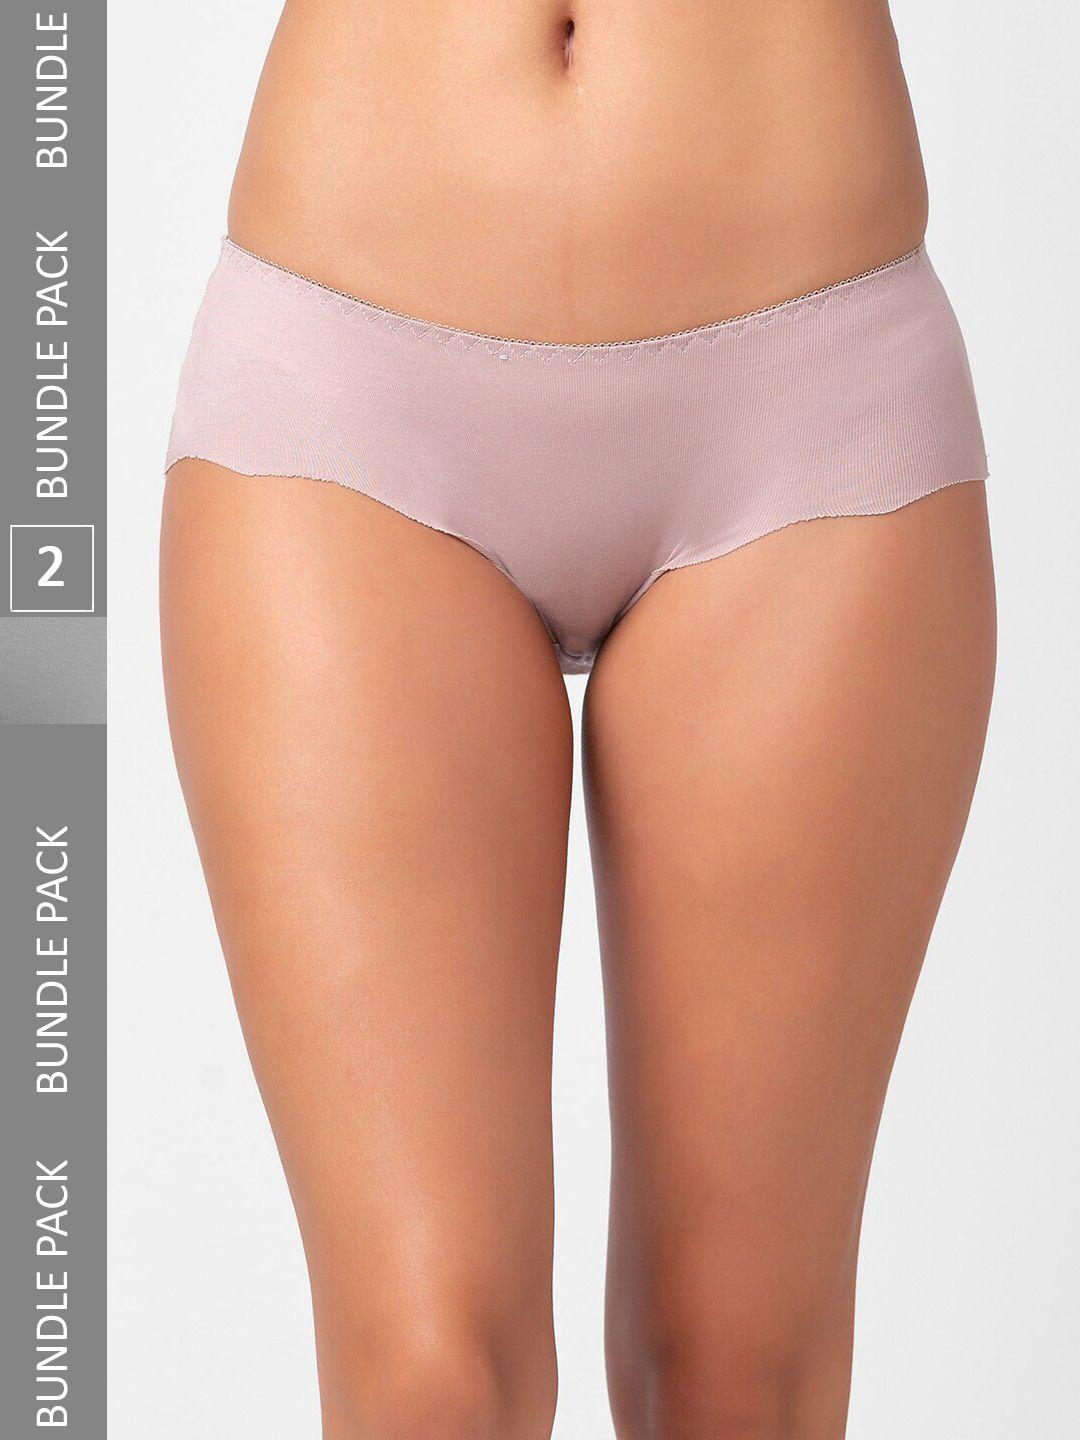 fashionrack women pack of 2 assorted cotton hipster briefs